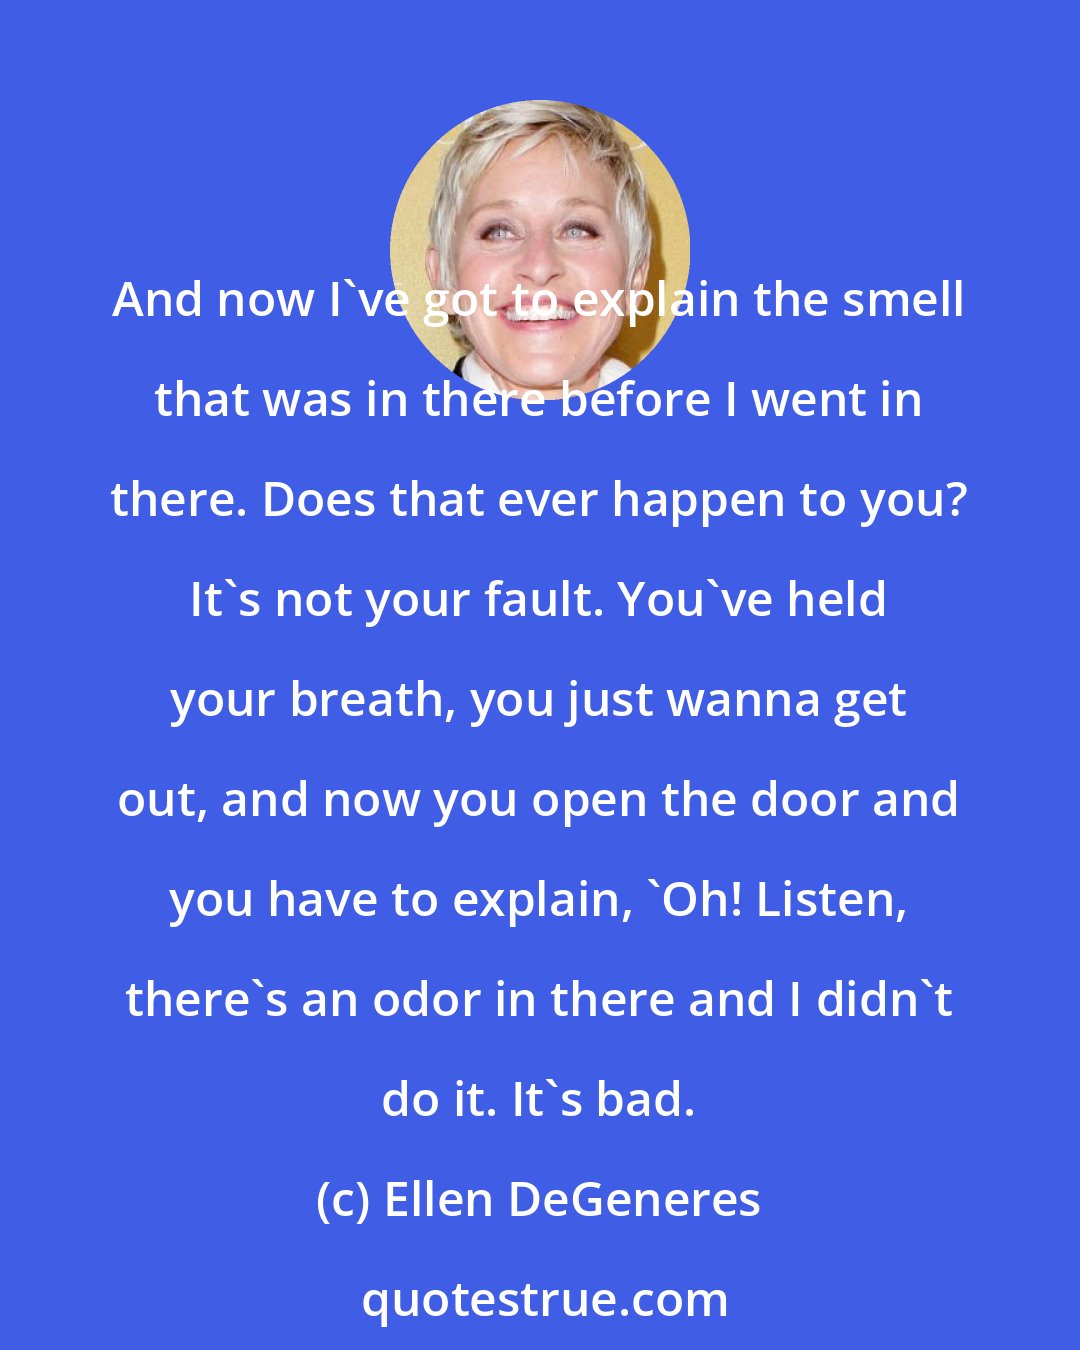 Ellen DeGeneres: And now I've got to explain the smell that was in there before I went in there. Does that ever happen to you? It's not your fault. You've held your breath, you just wanna get out, and now you open the door and you have to explain, 'Oh! Listen, there's an odor in there and I didn't do it. It's bad.